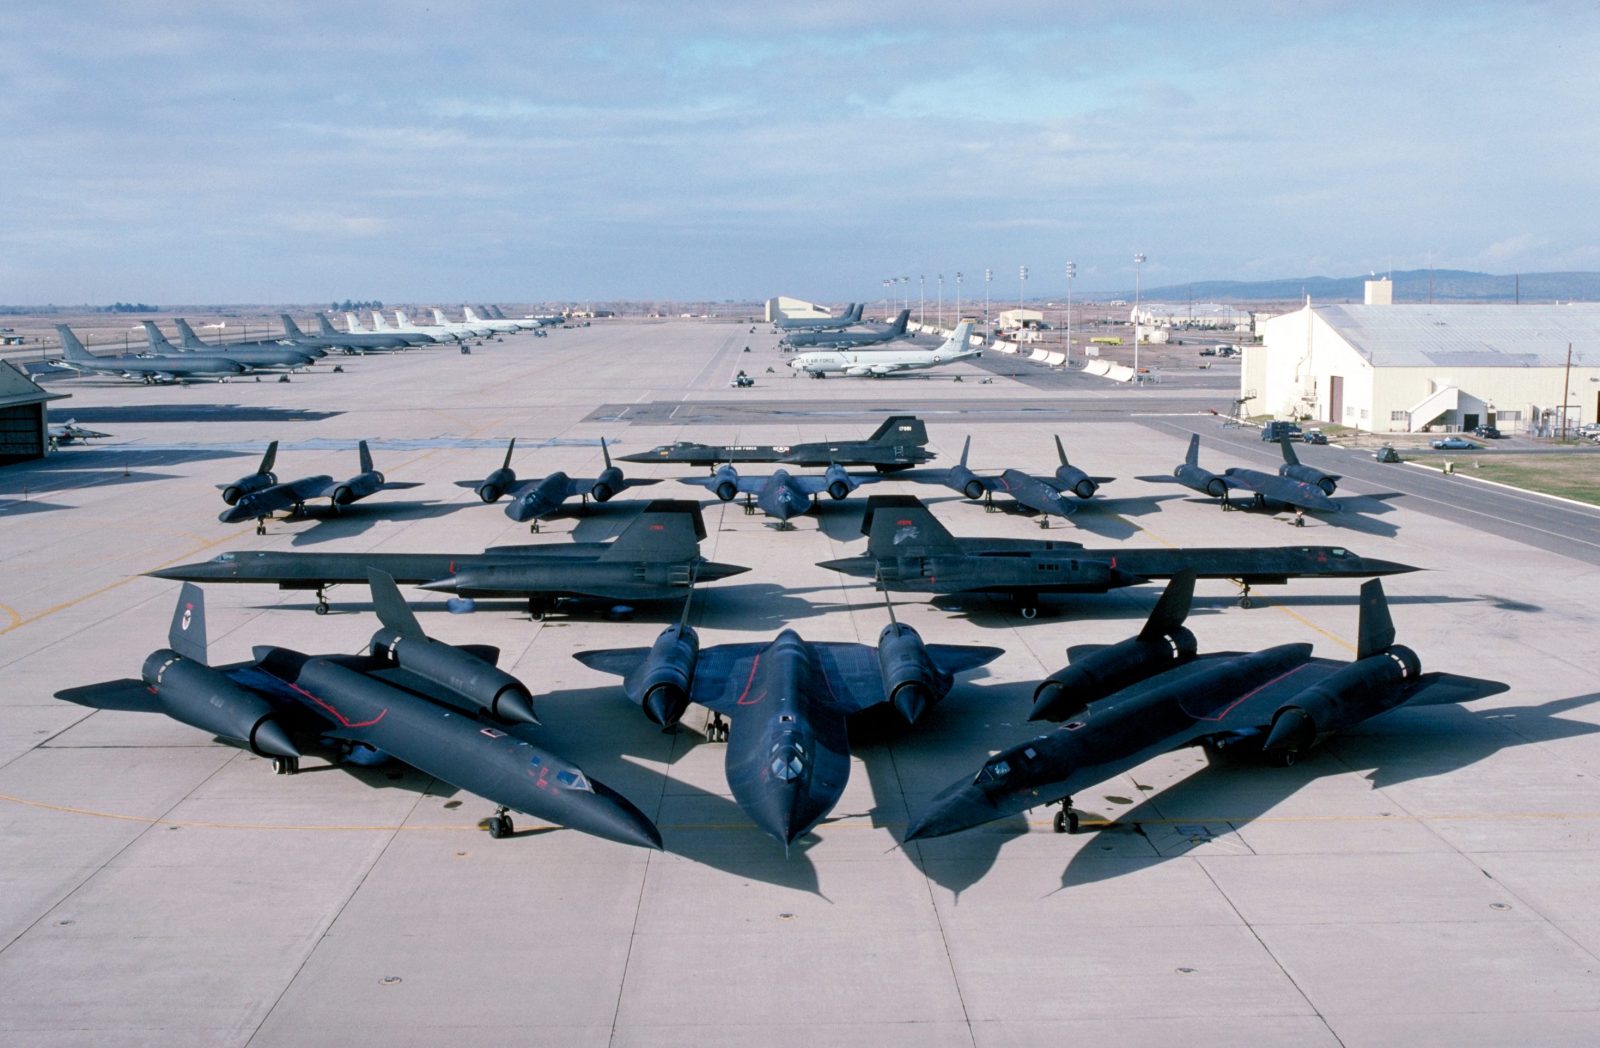 Lockheed “Skunk Works” Celebrates their 75th Anniversary of Innovation and Secrecy